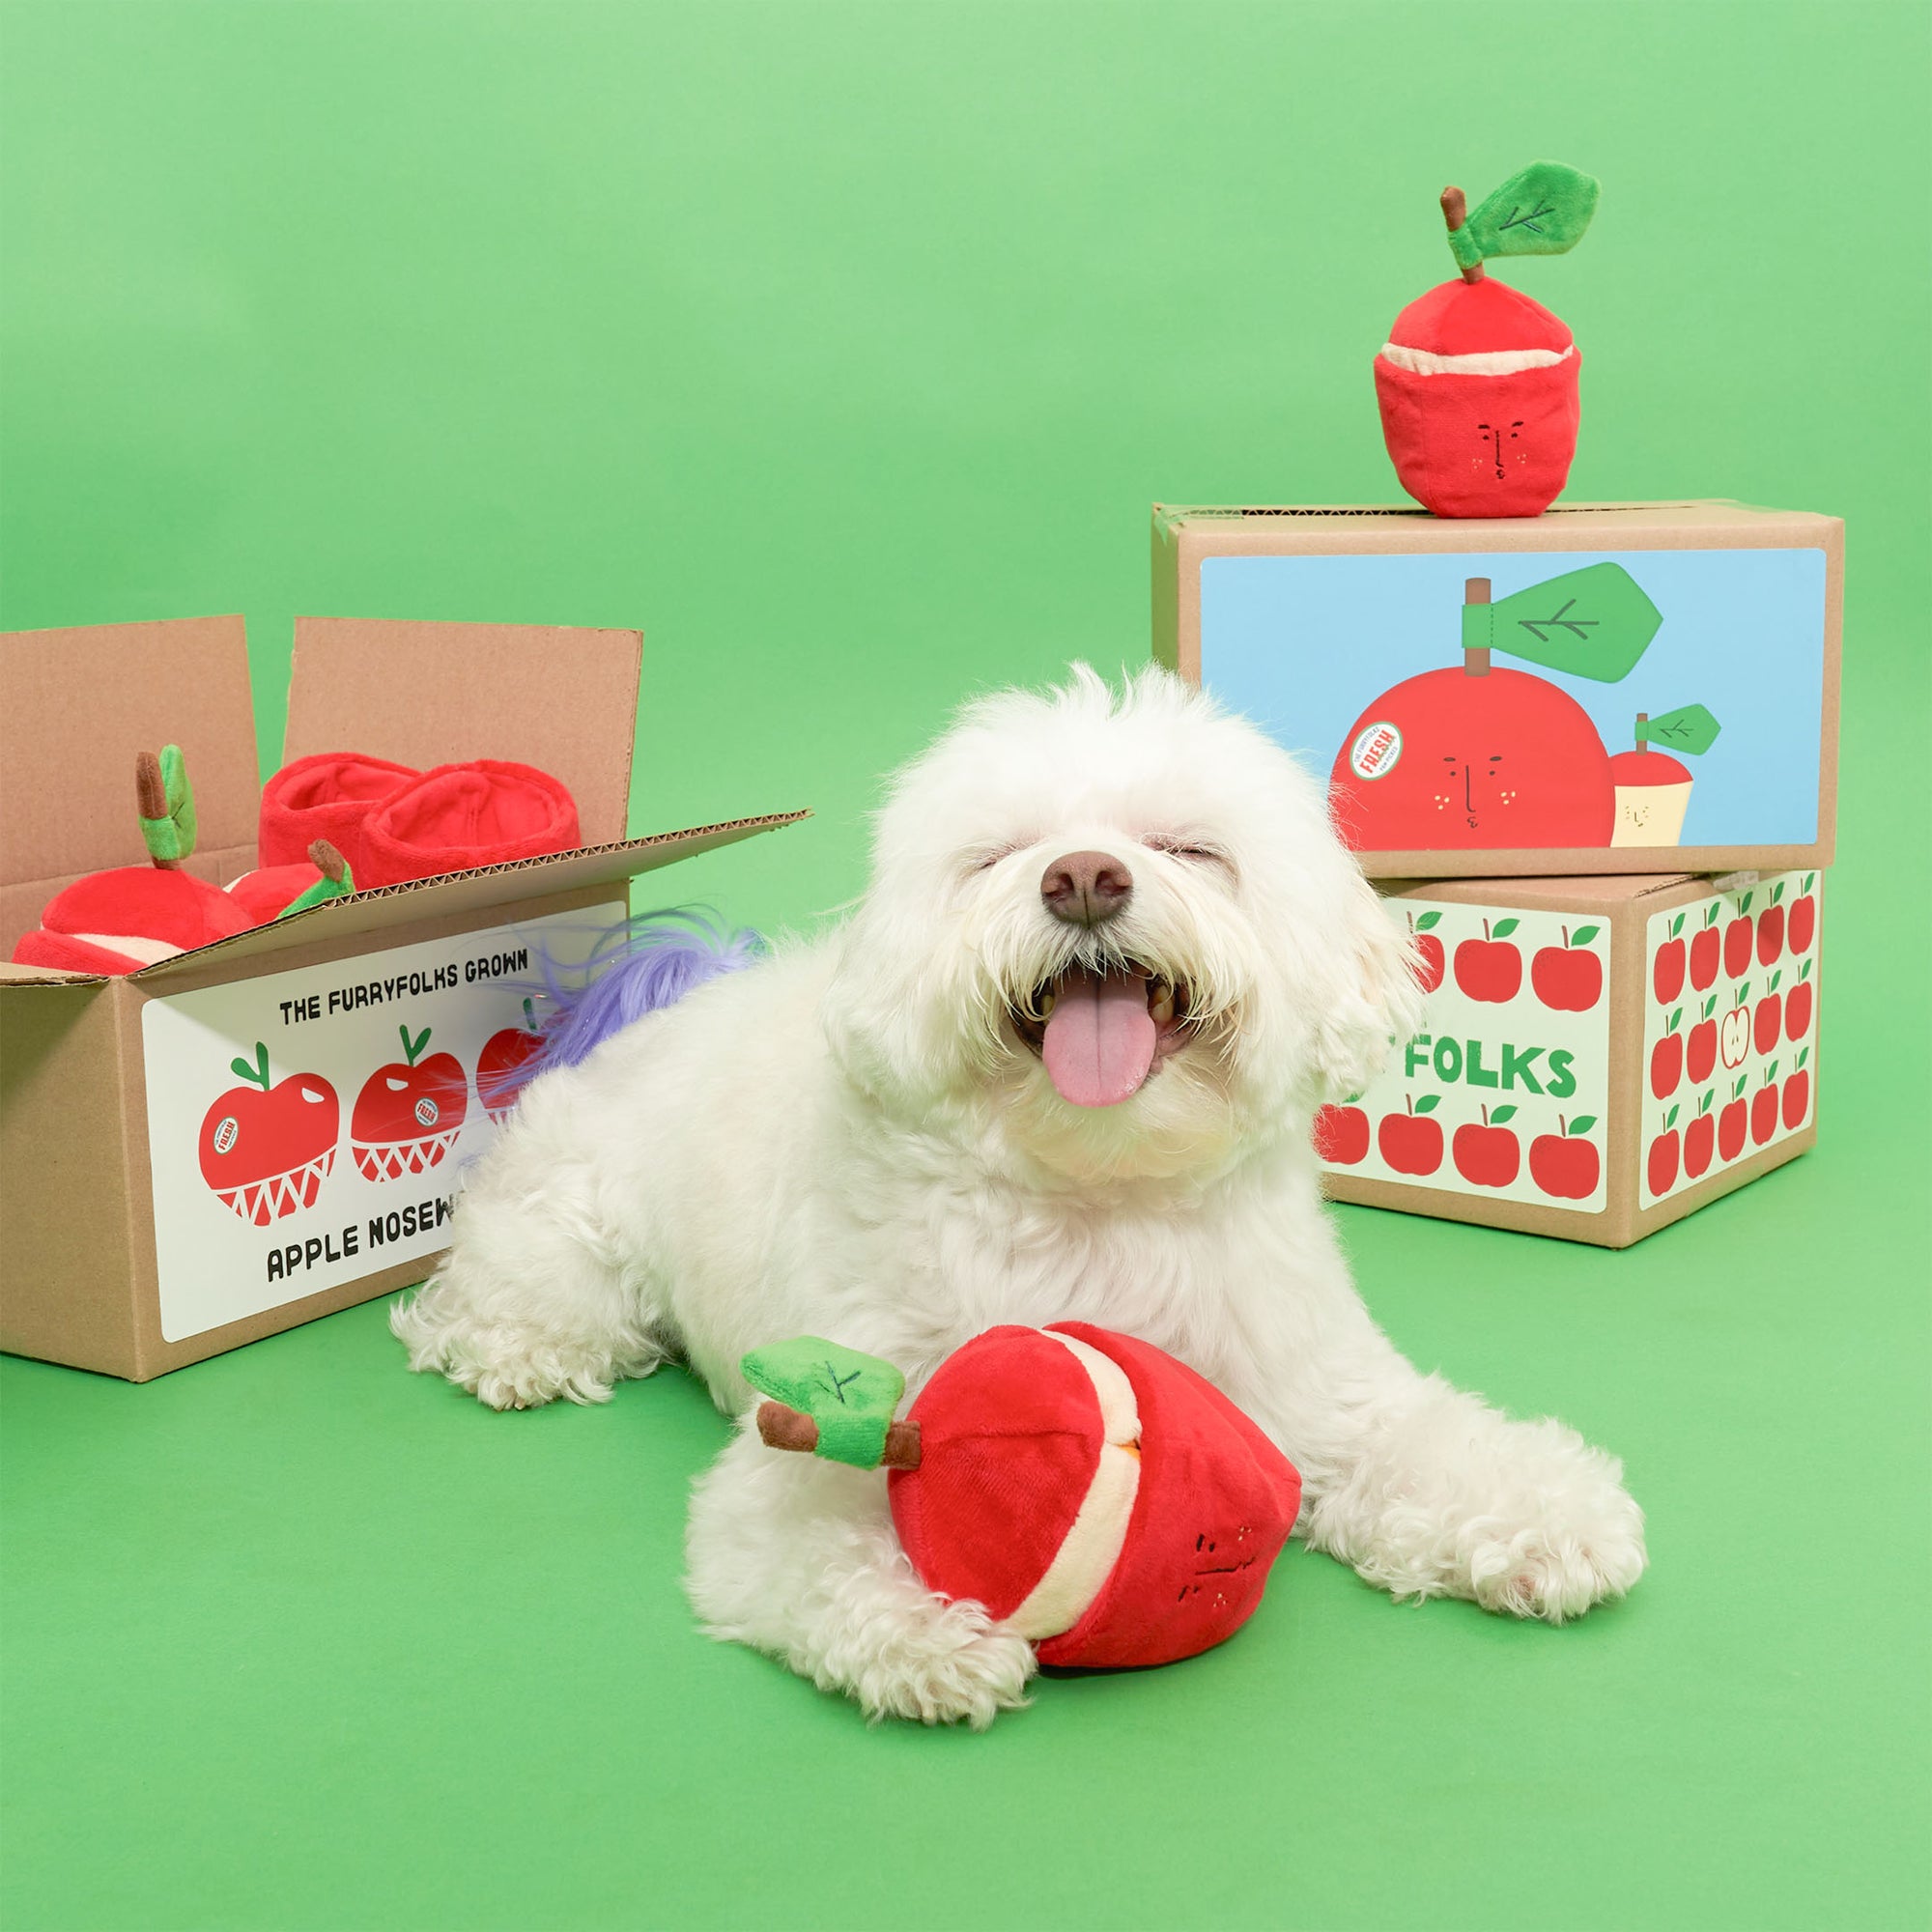 A joyful white dog with a blue accessory lying down on a green background, with a red apple-shaped dog toy in front, and cardboard boxes with more apple toys and a label saying "The Furryfolks Grown Apple Nosework Toy".